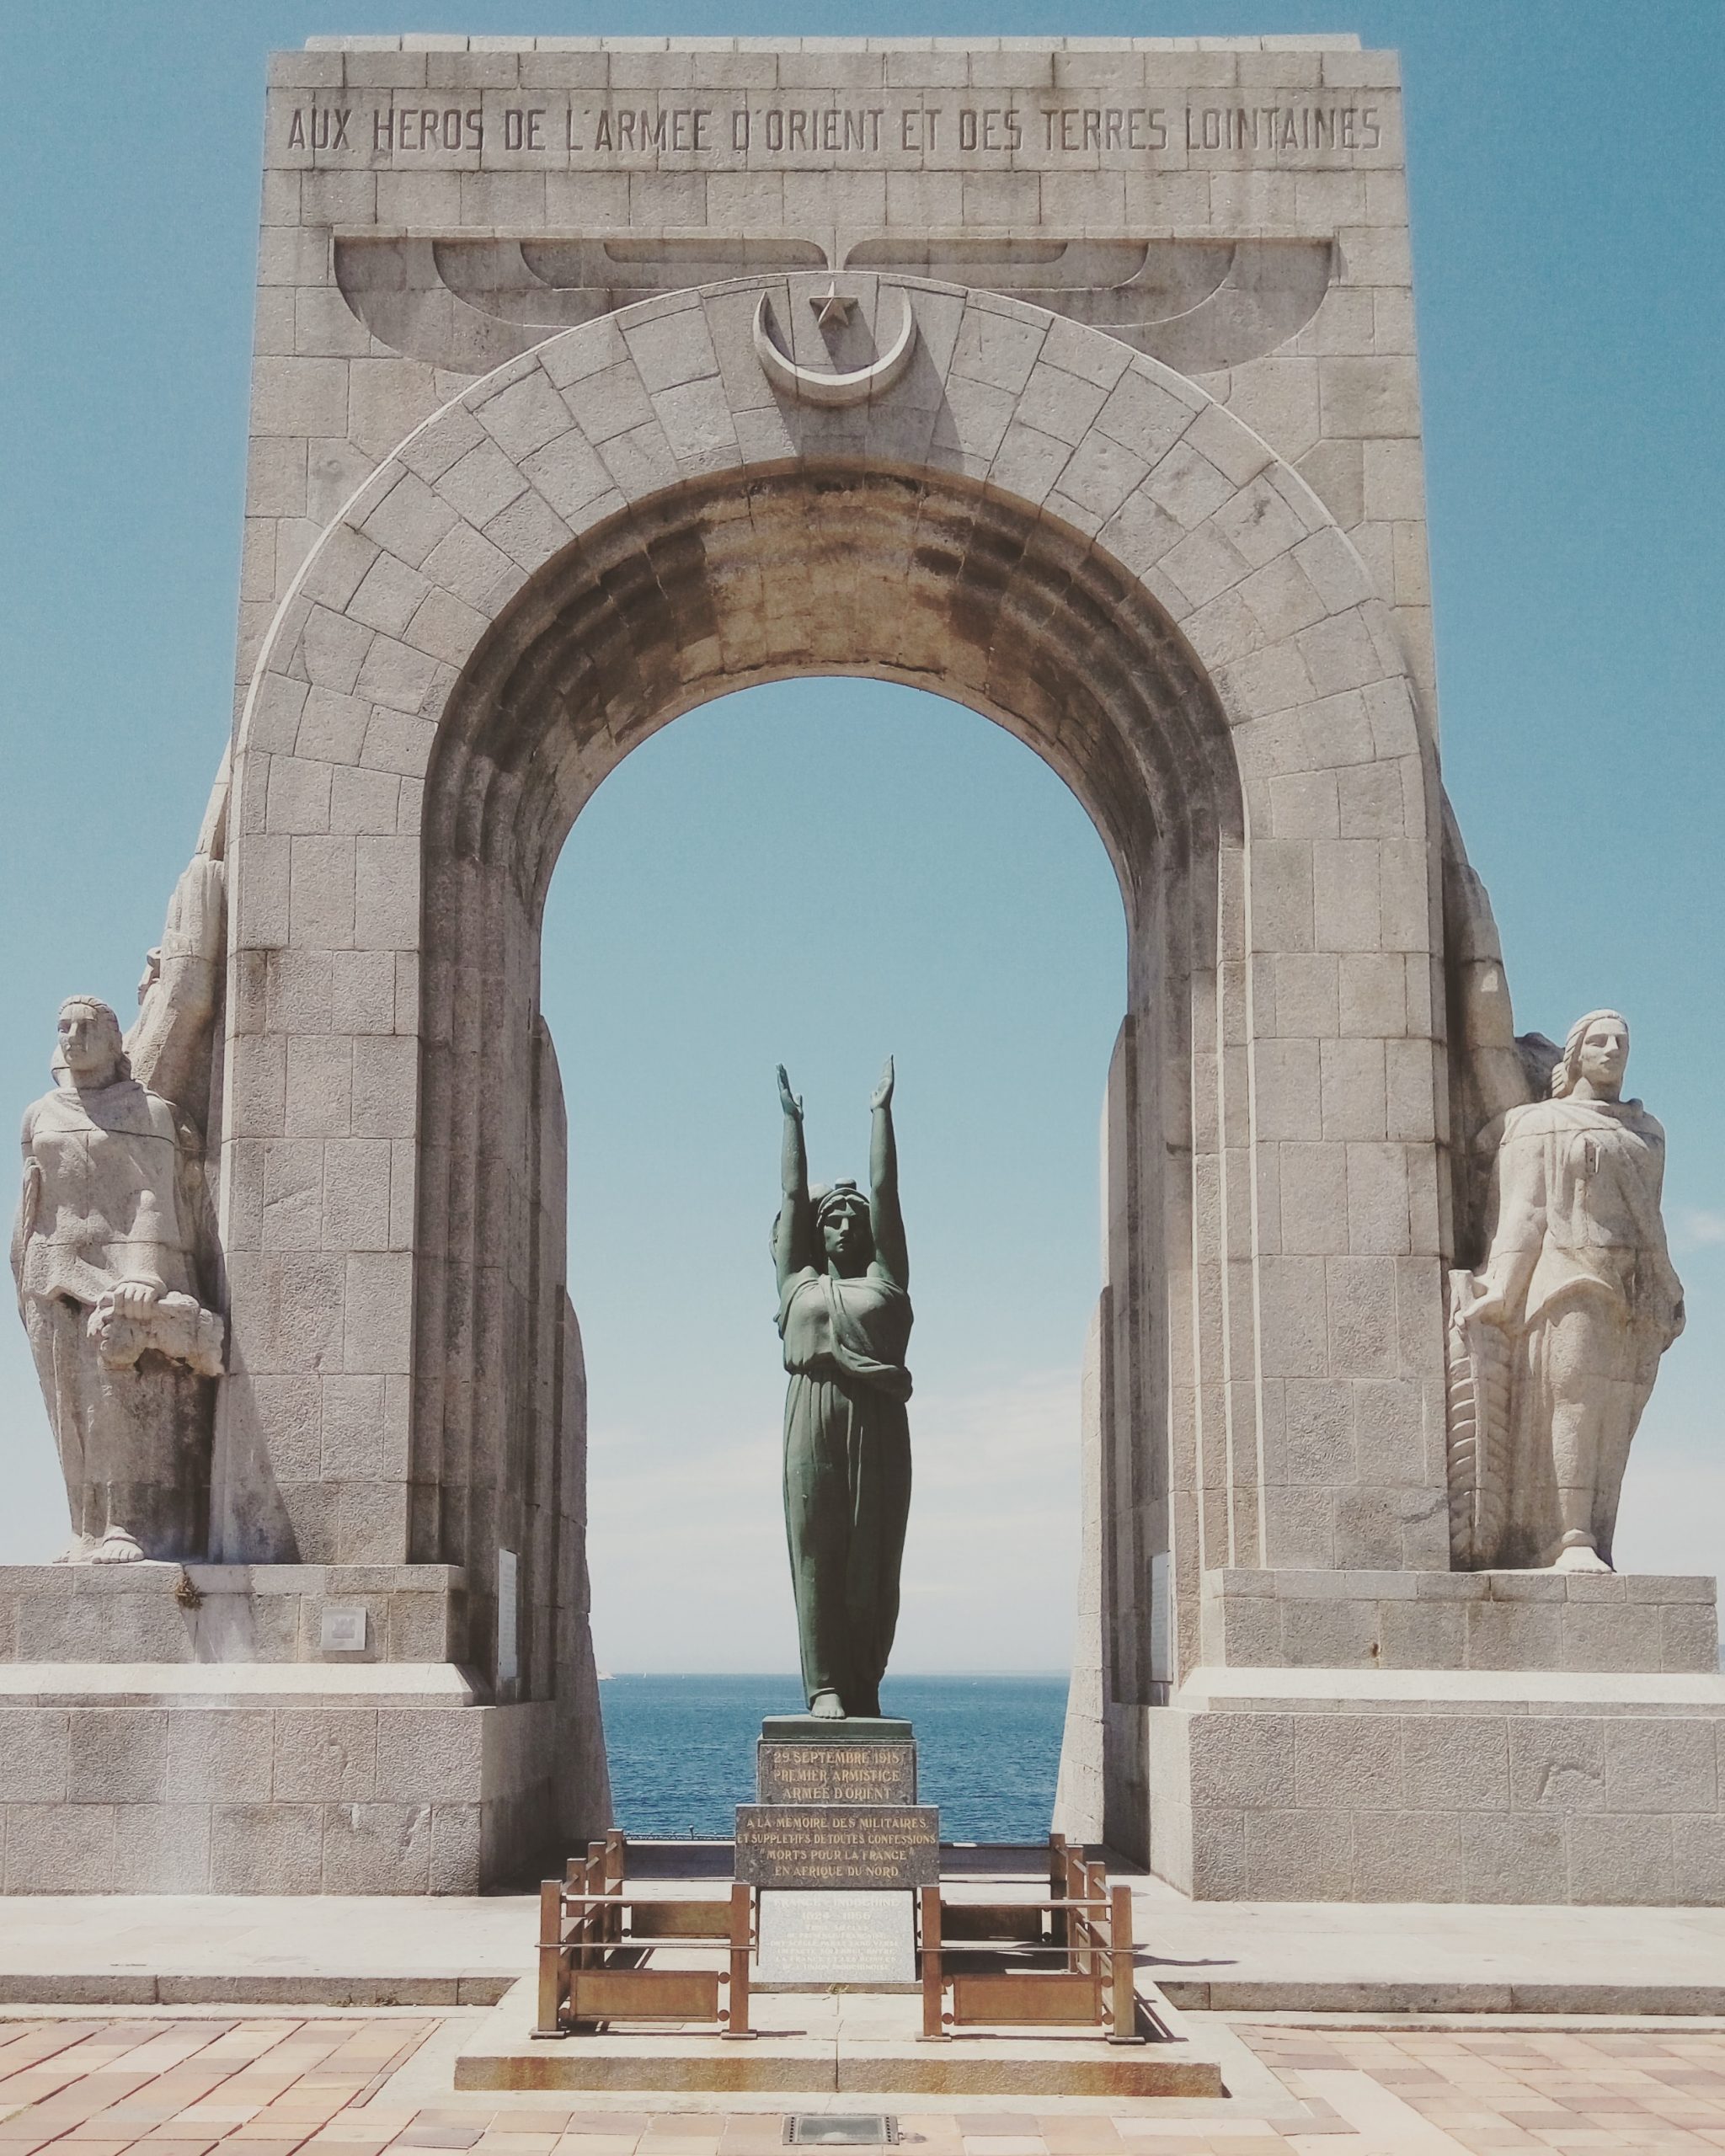 The Porte d’Orient, or The Oriental Door) - representing the thousands of French-African Colonial soldiers who left from the shores of Marseille to fight in the the Orient during World War I